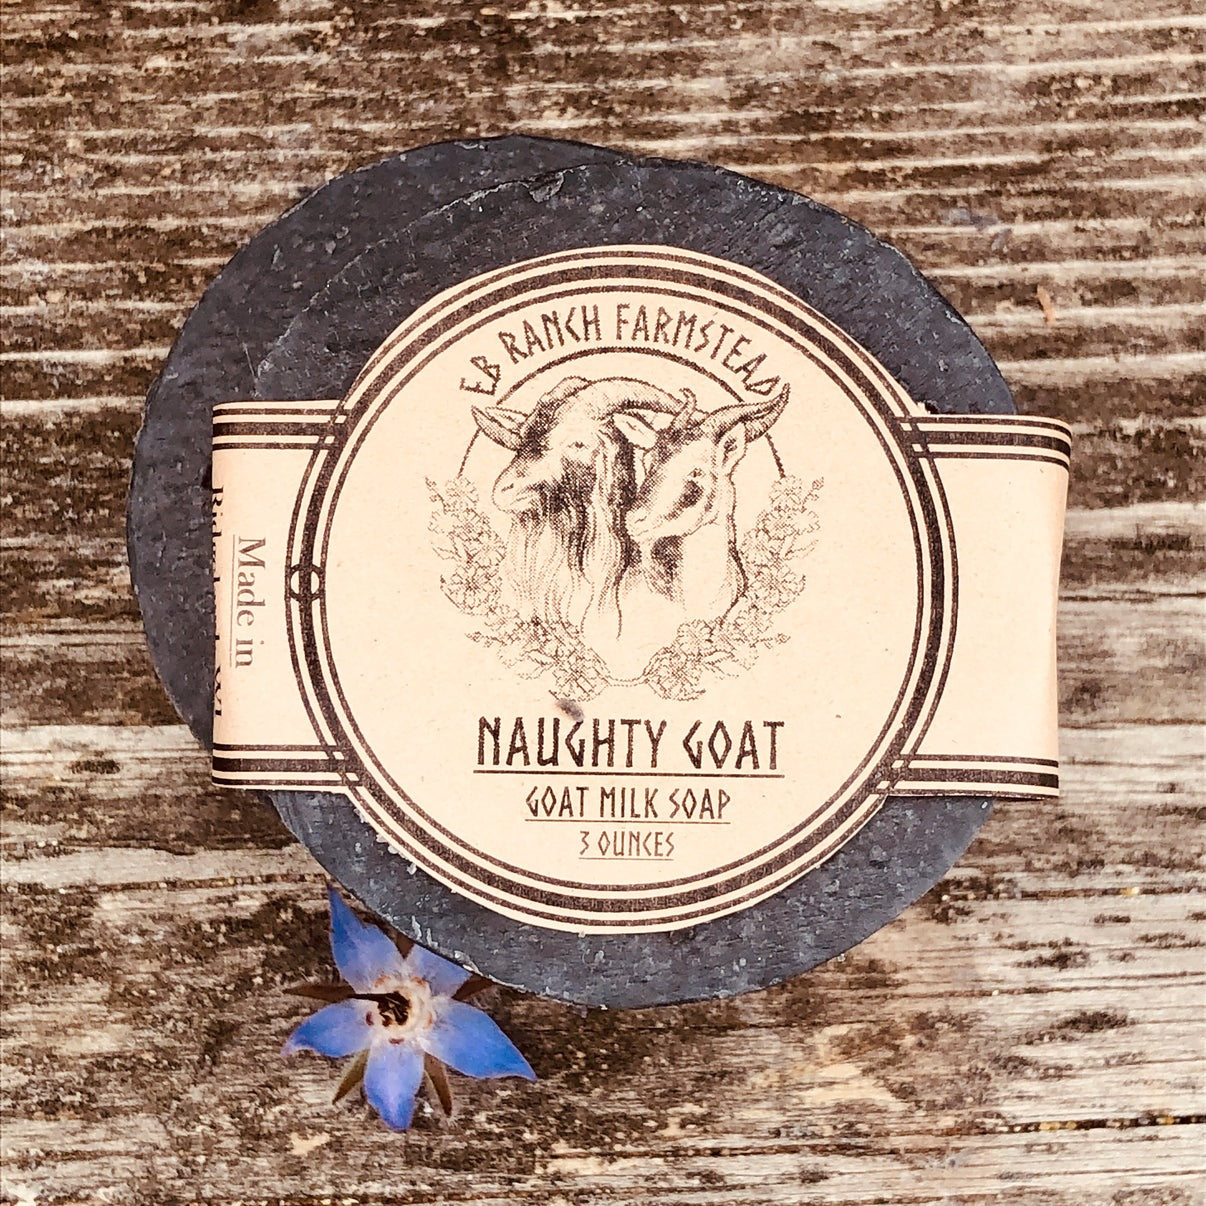 Bar of Wild Haven Farm's Naughty Goat goat milk soap made with San Clemente Island goat milk